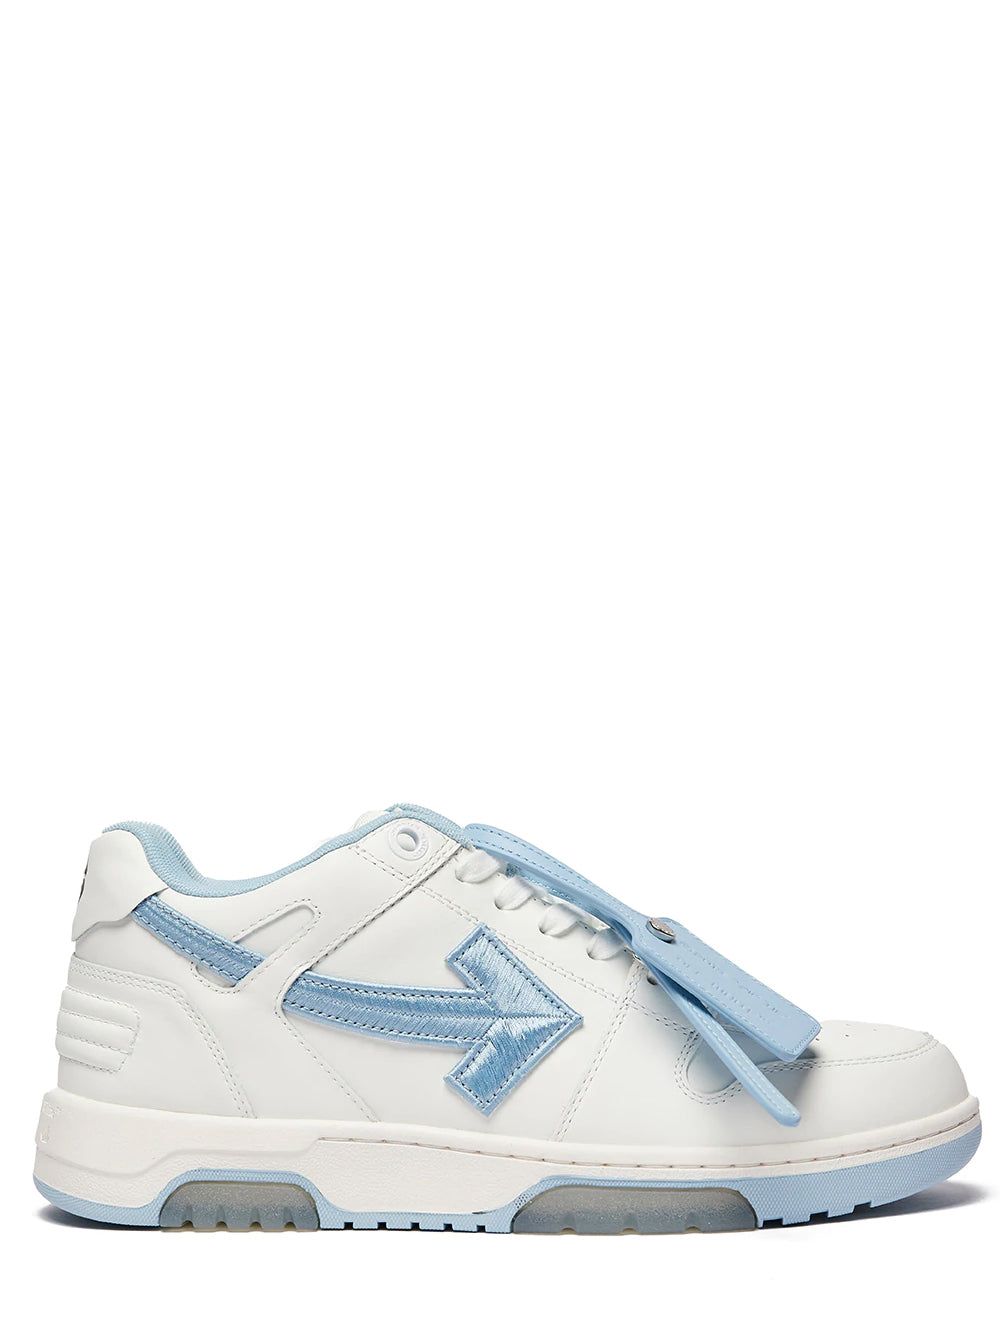 OFF-WHITE Out Of Office Specials White/Blue - MAISONDEFASHION.COM